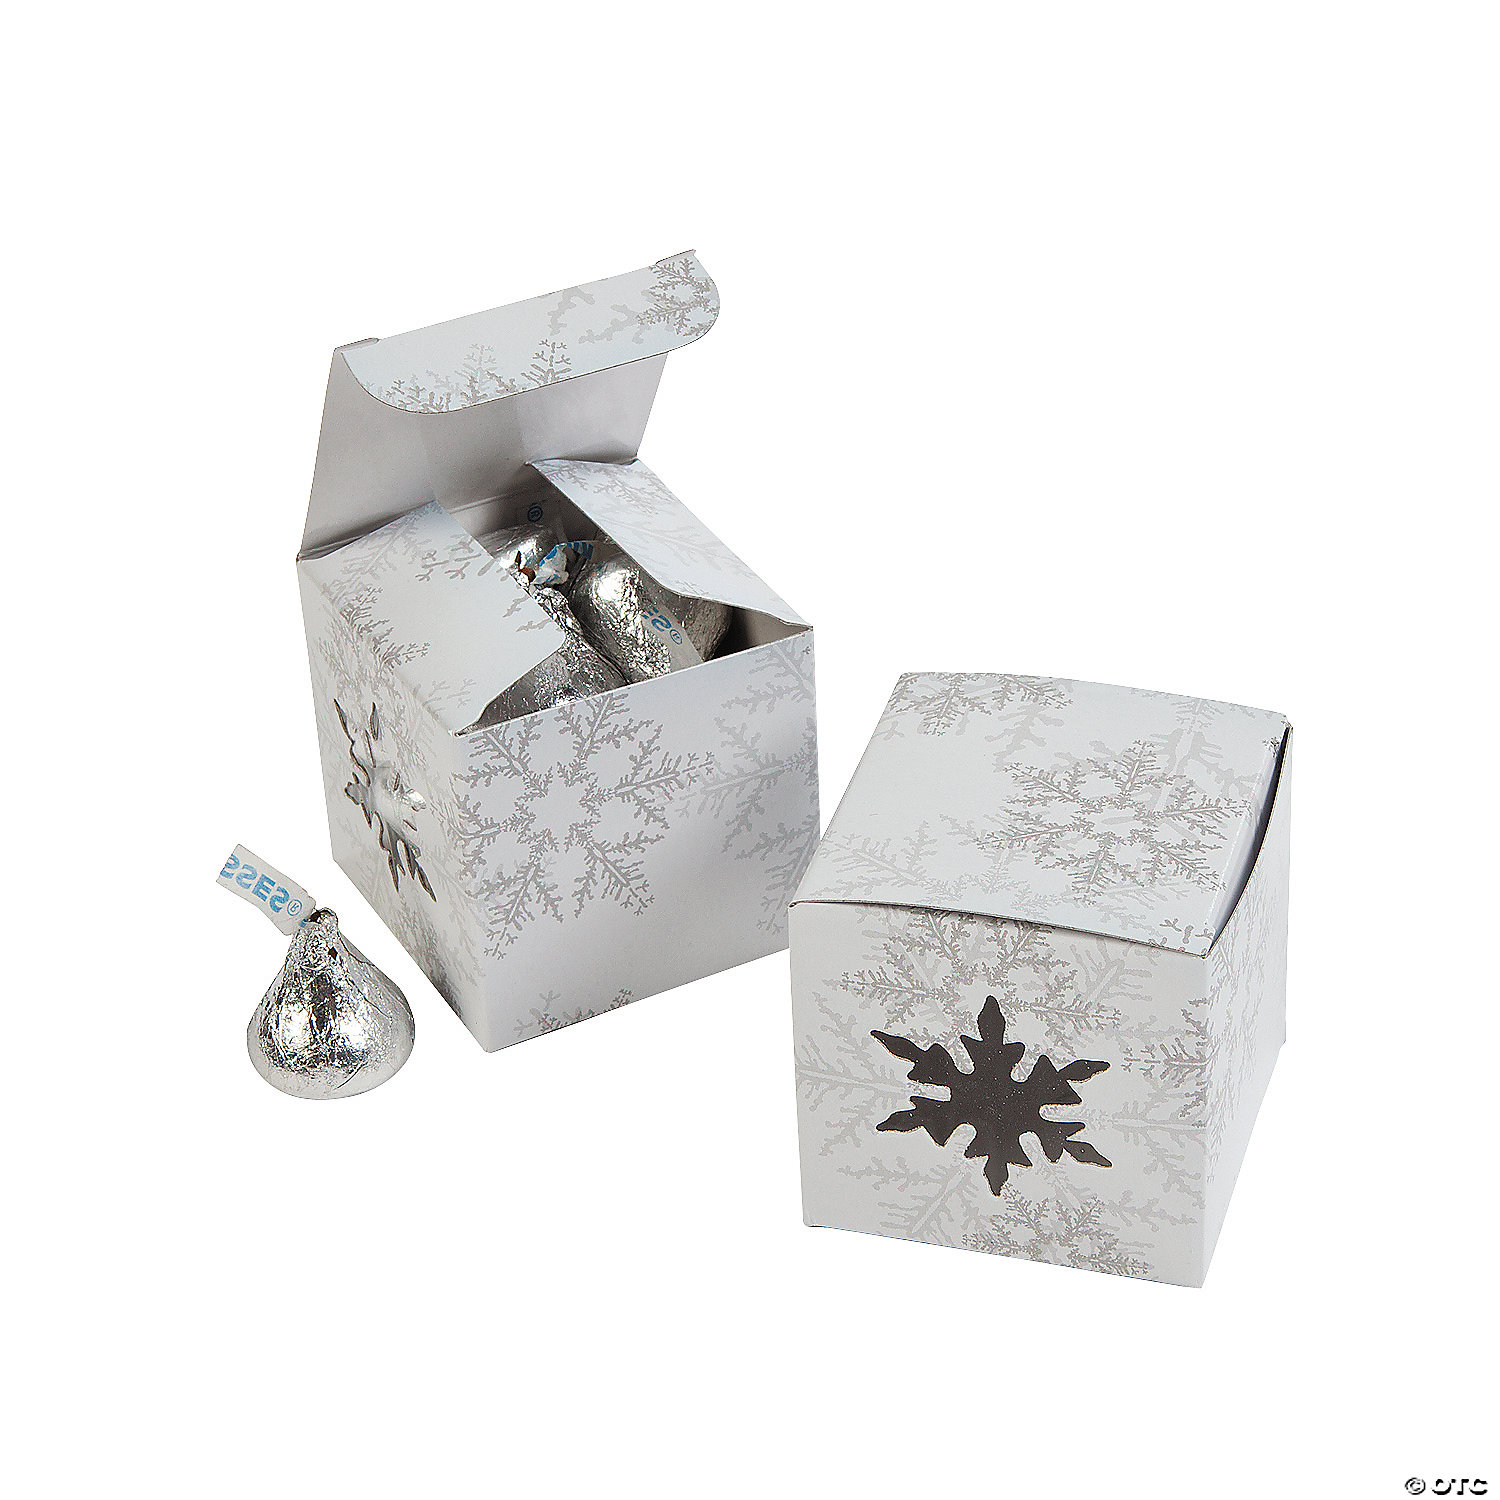 6 Silver Snowflakes Square hinged boxes w White Ribbon Christmas Holiday Gifts